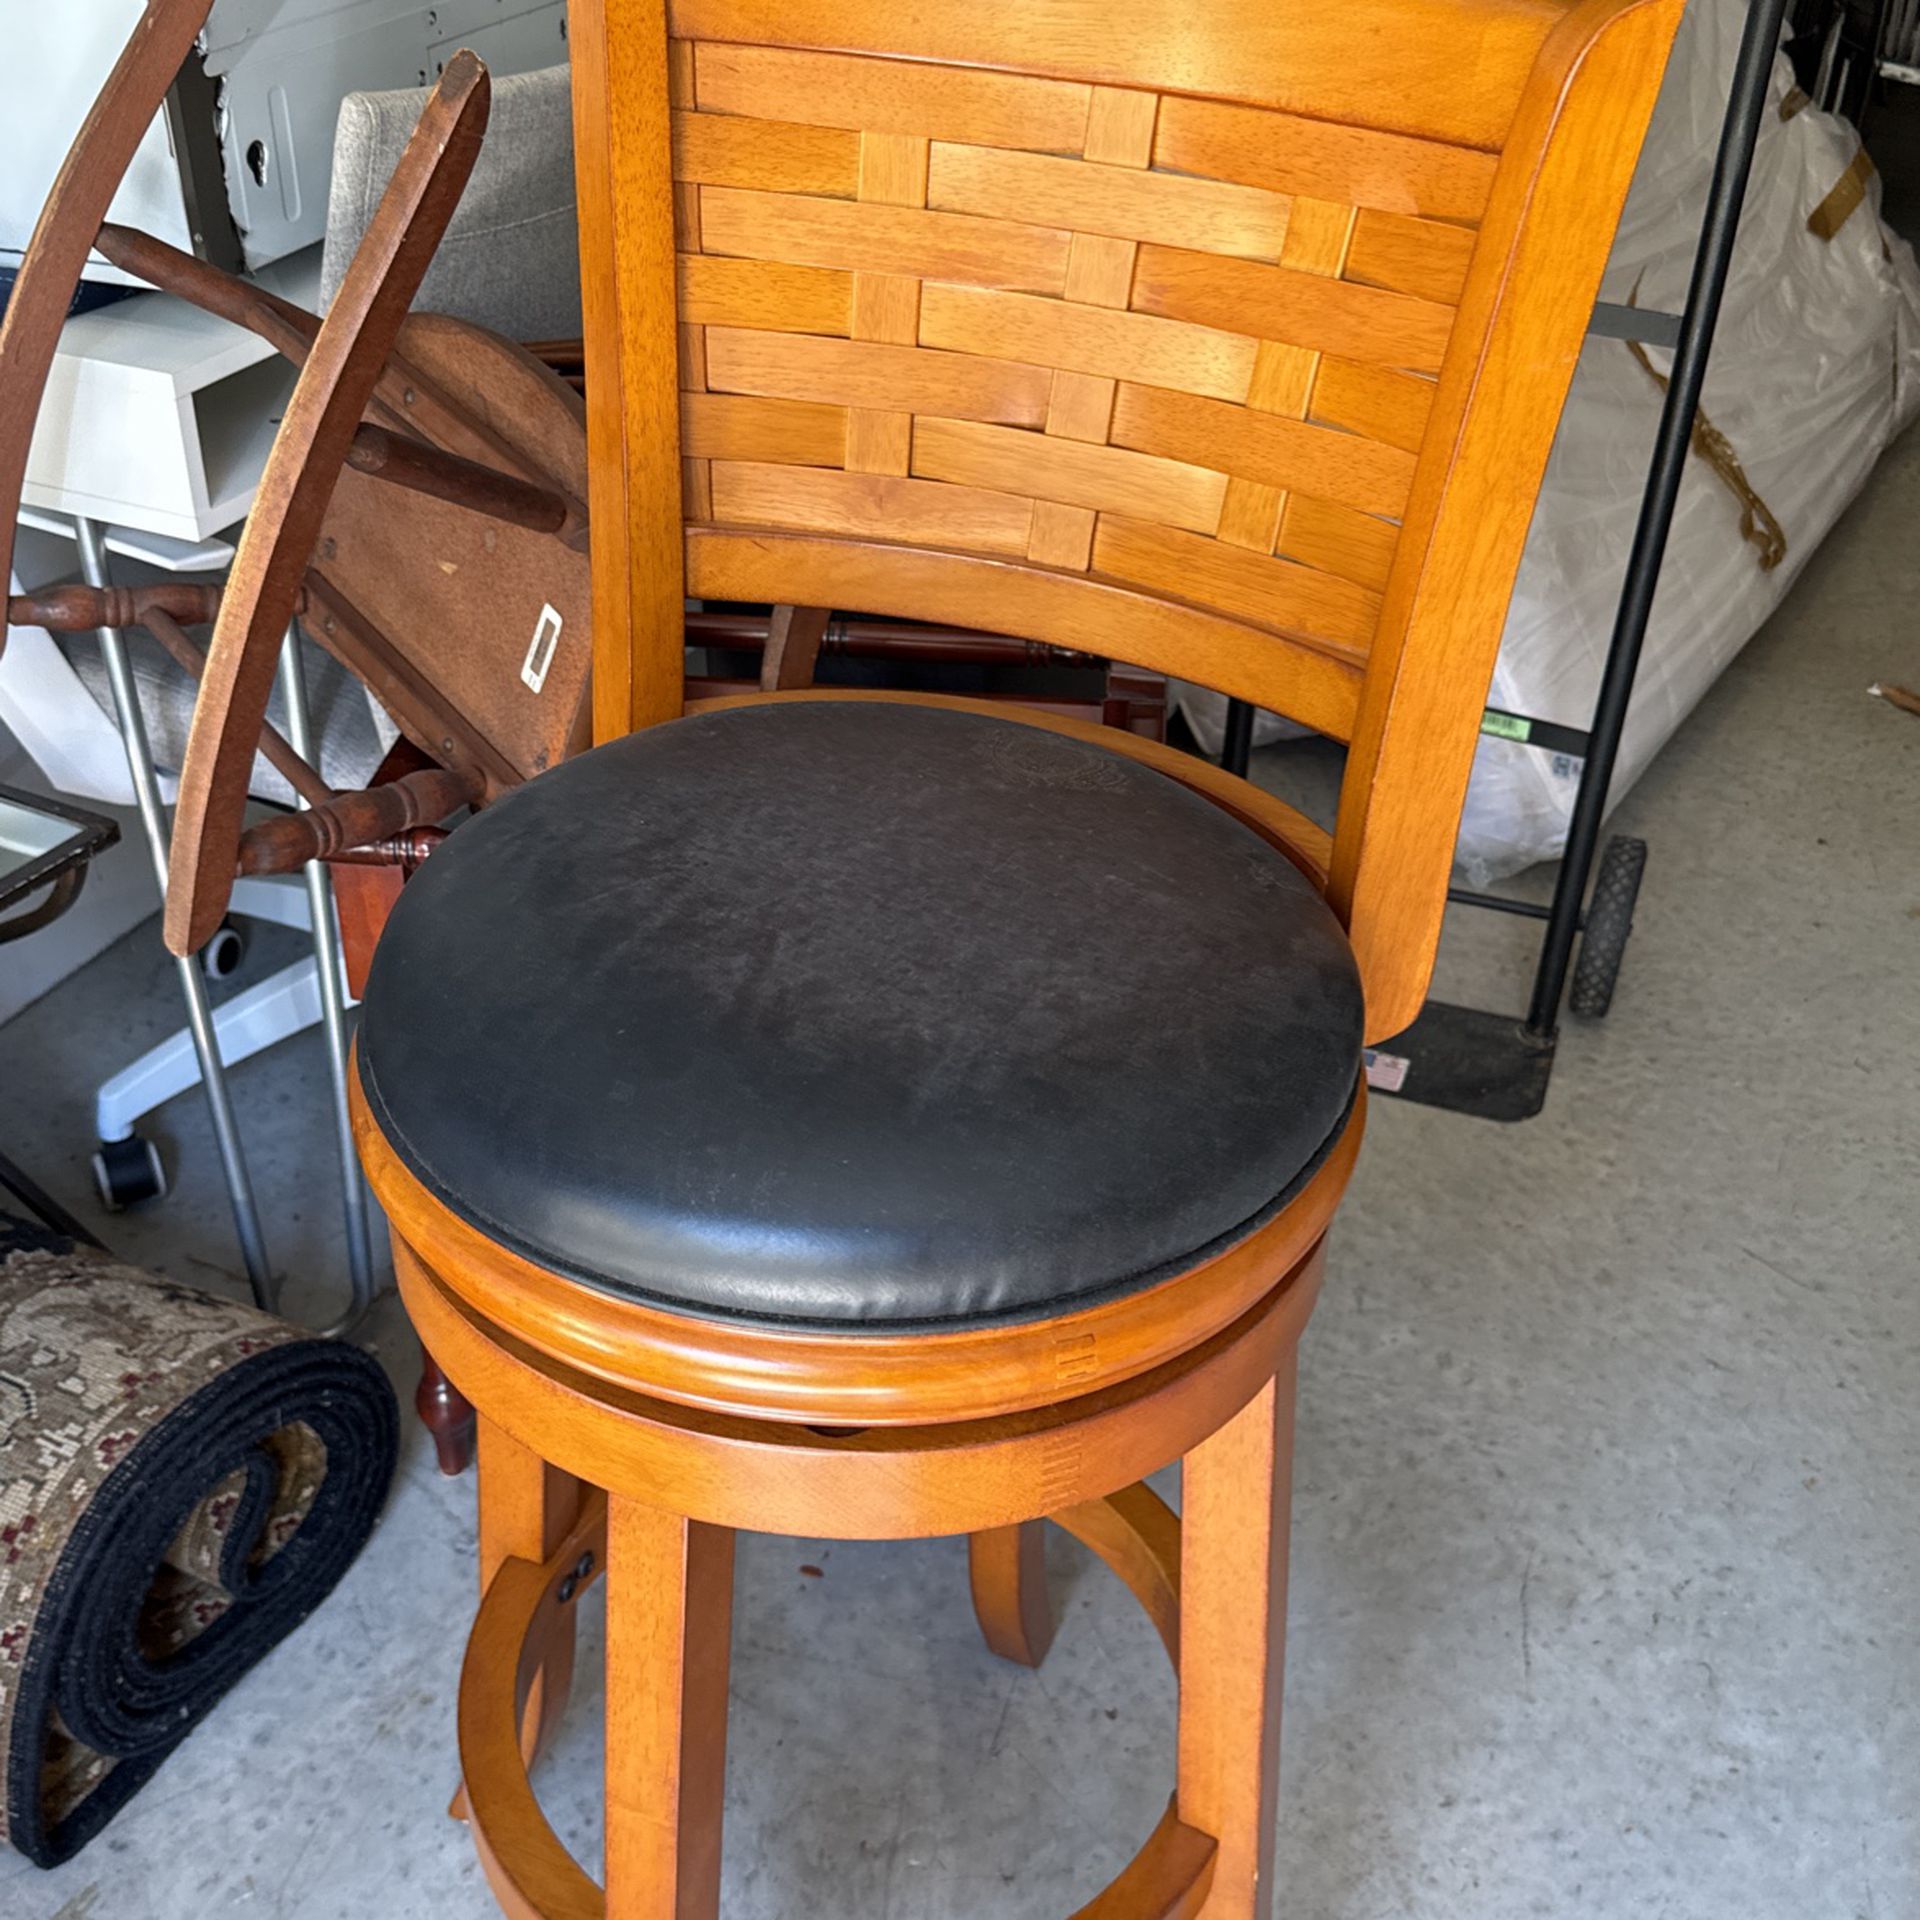 2 Bar Stools - They Swivel. - Excellent Condition. - $45